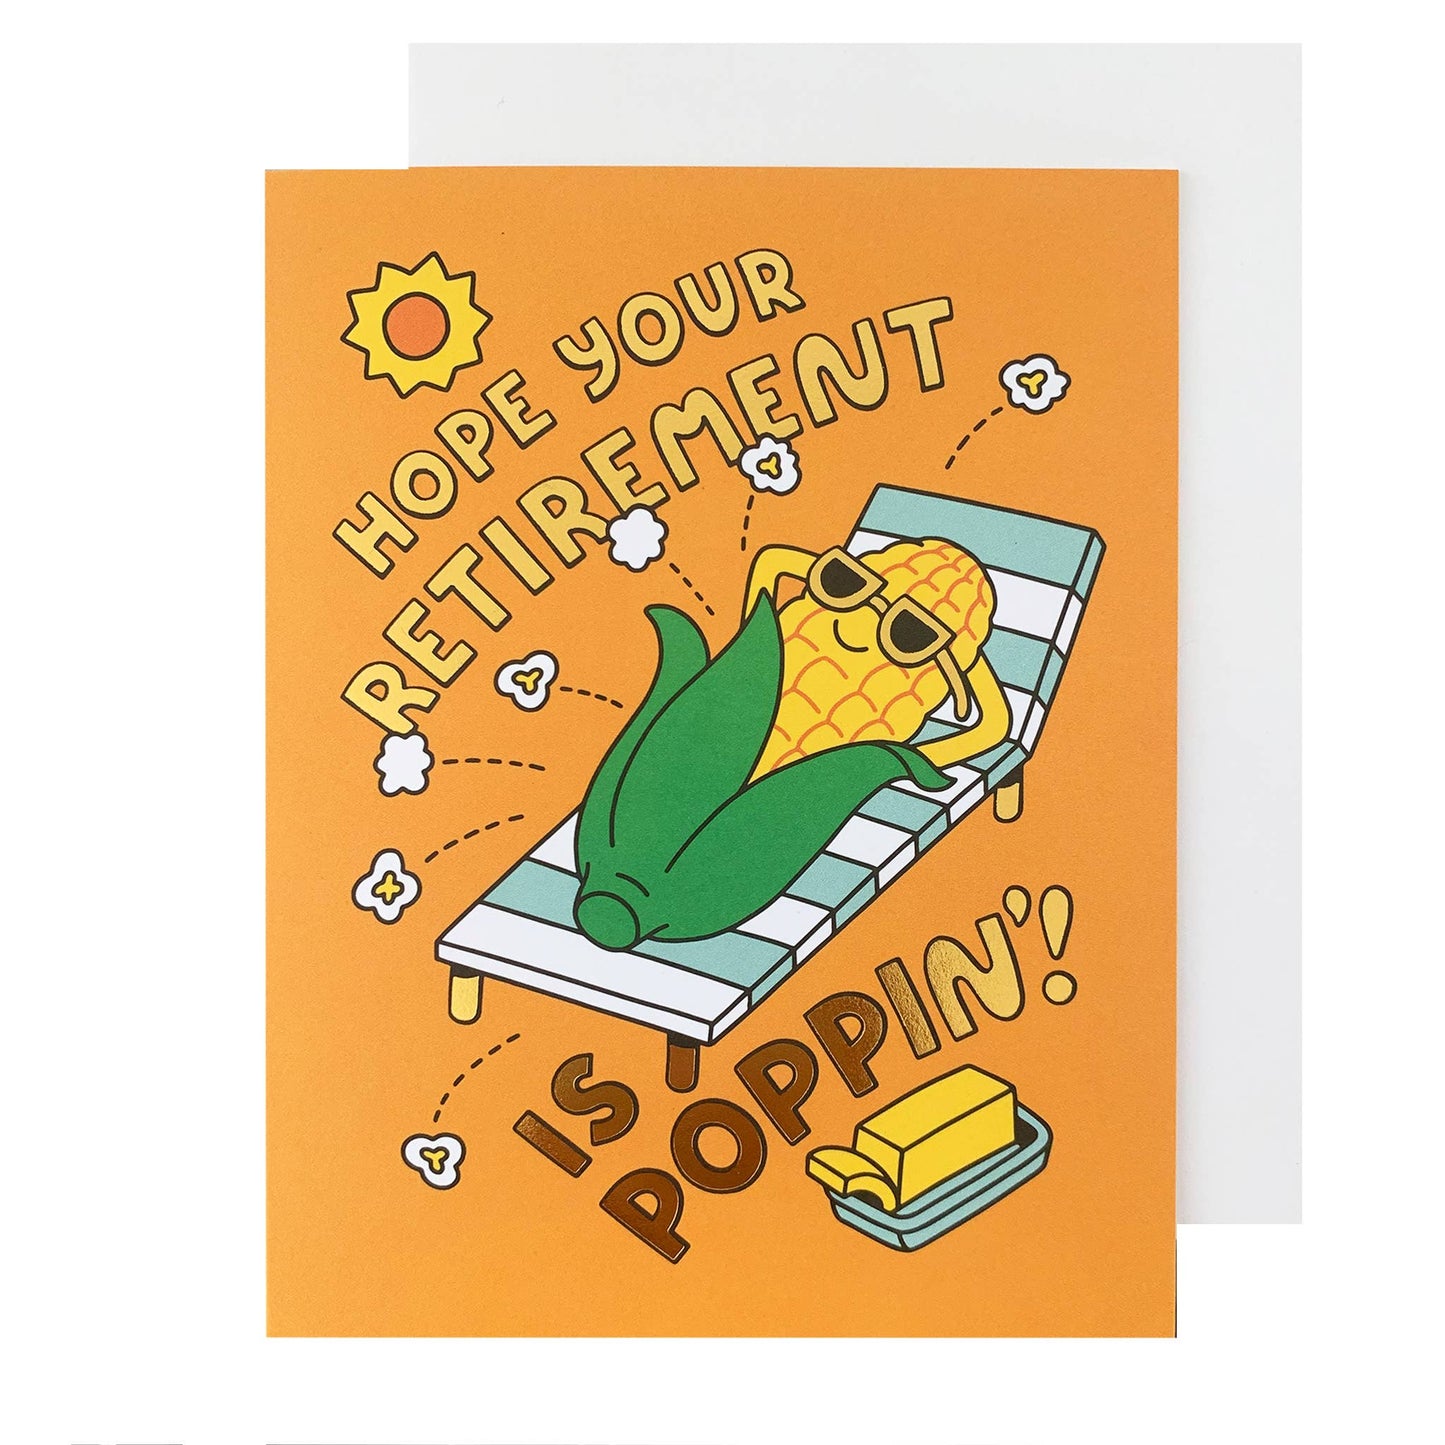 Corn retirement card that reads "Hope Your Retirement is Poppin'!"